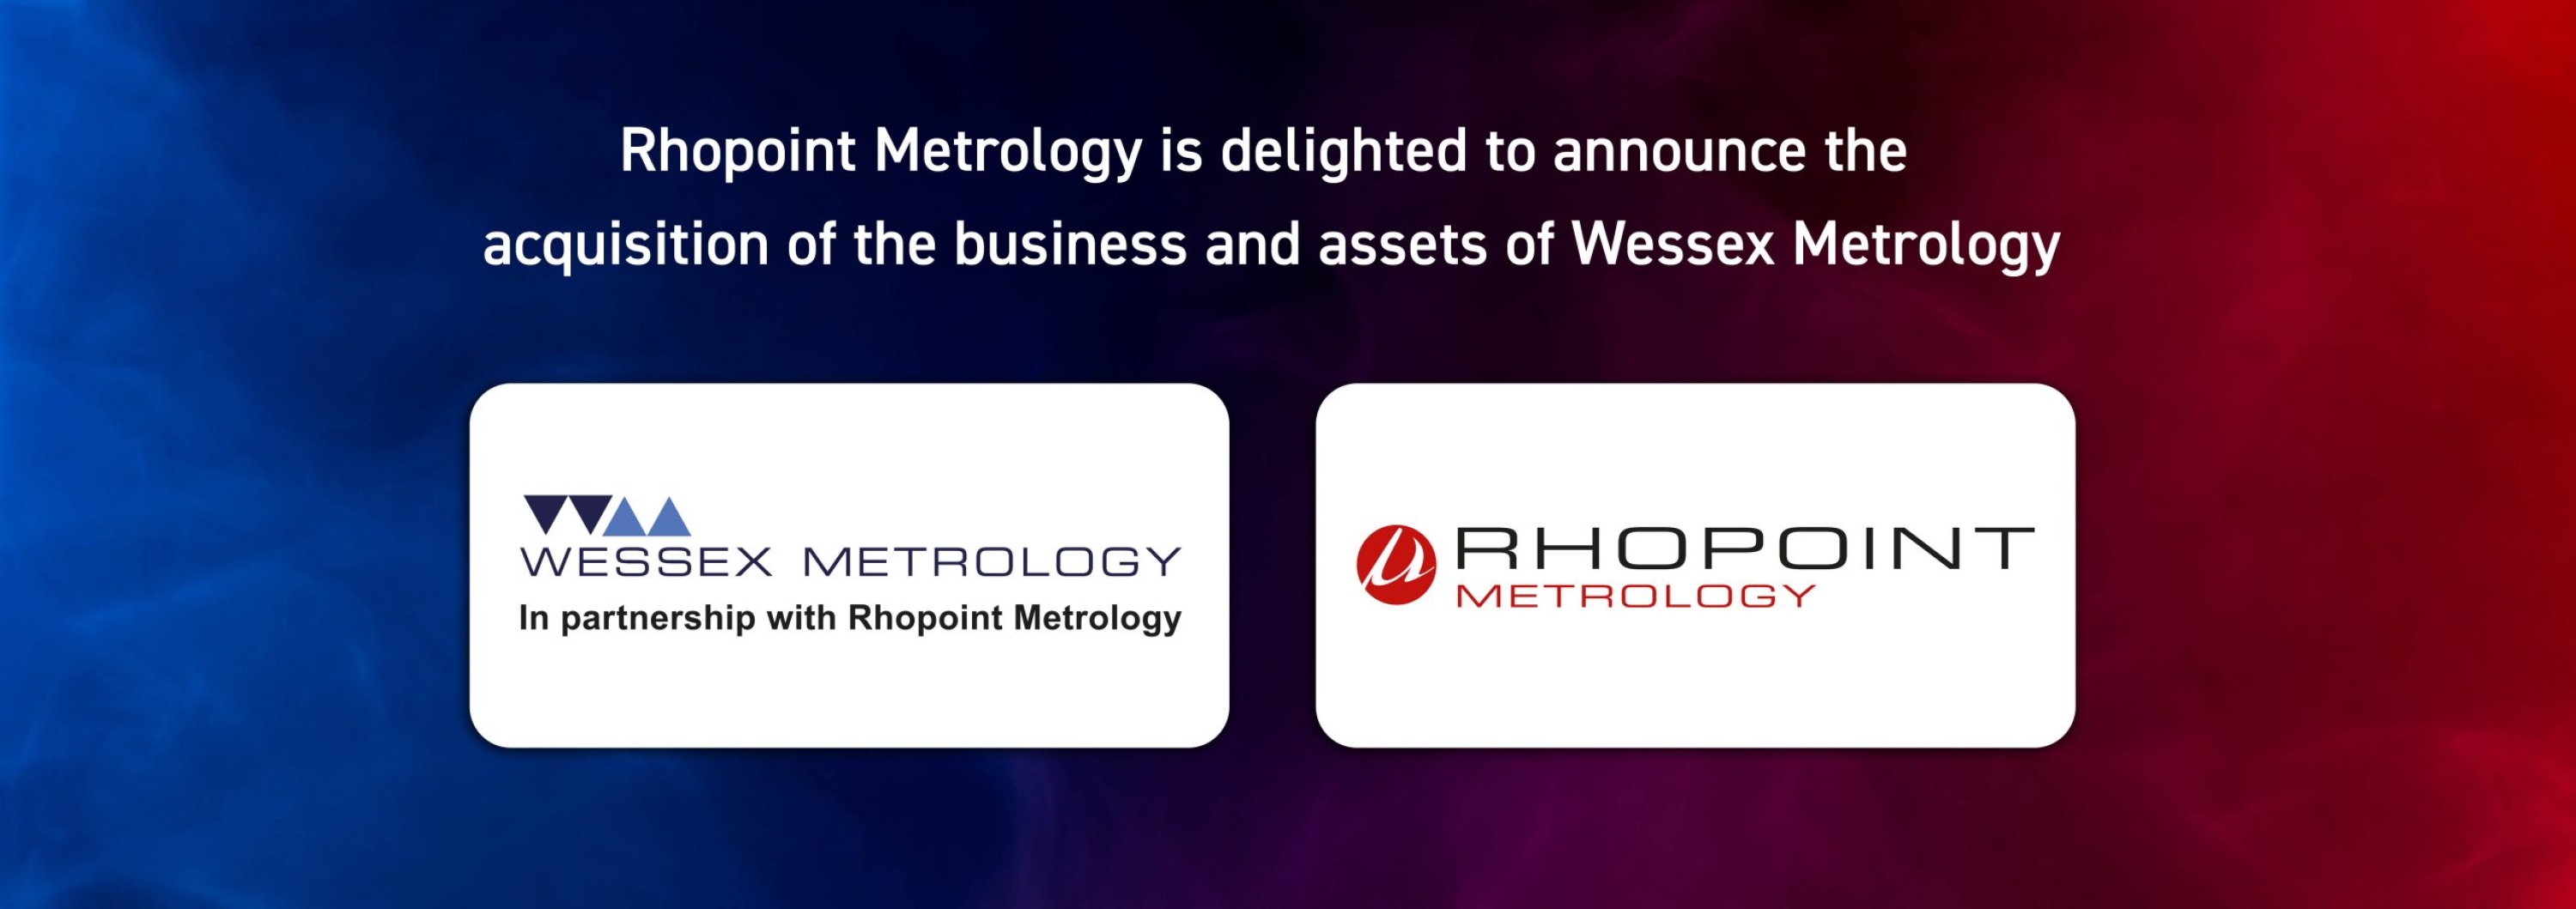 Rhopoint Metrology is delighted to announce the acquisition of the business and assets of Wessex Metrology